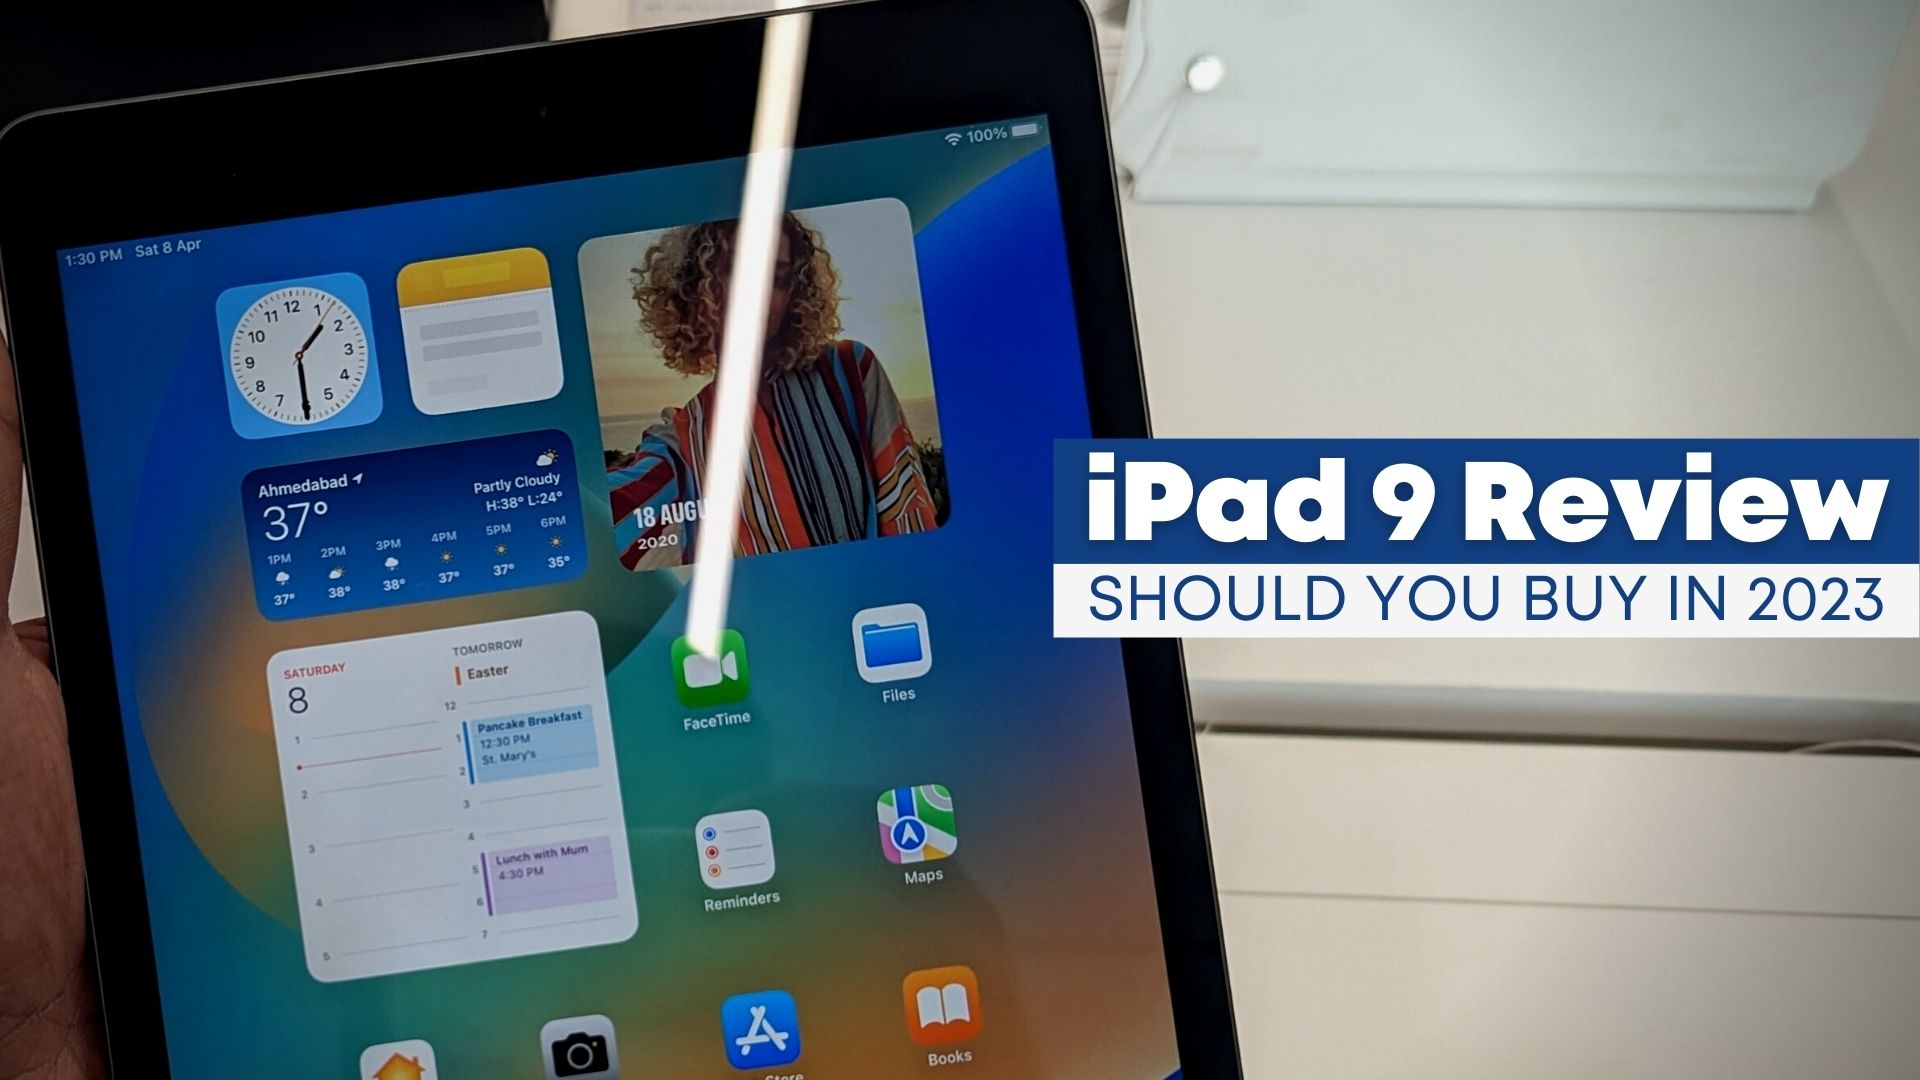 iPad 9 Review